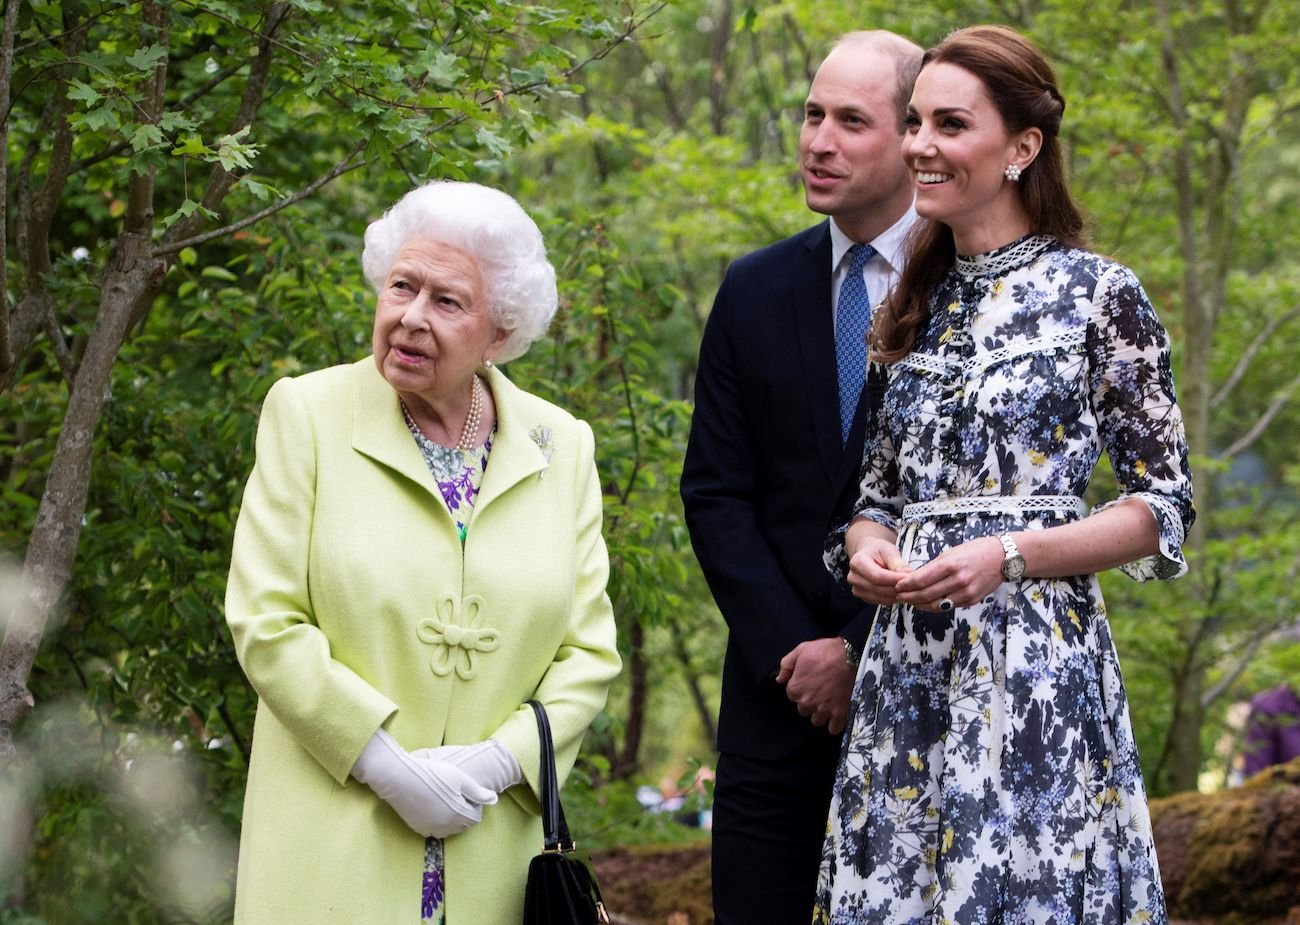 Queen Elizabeth standing with Prince William and Kate Middleton, all looking toward the left side of the picture